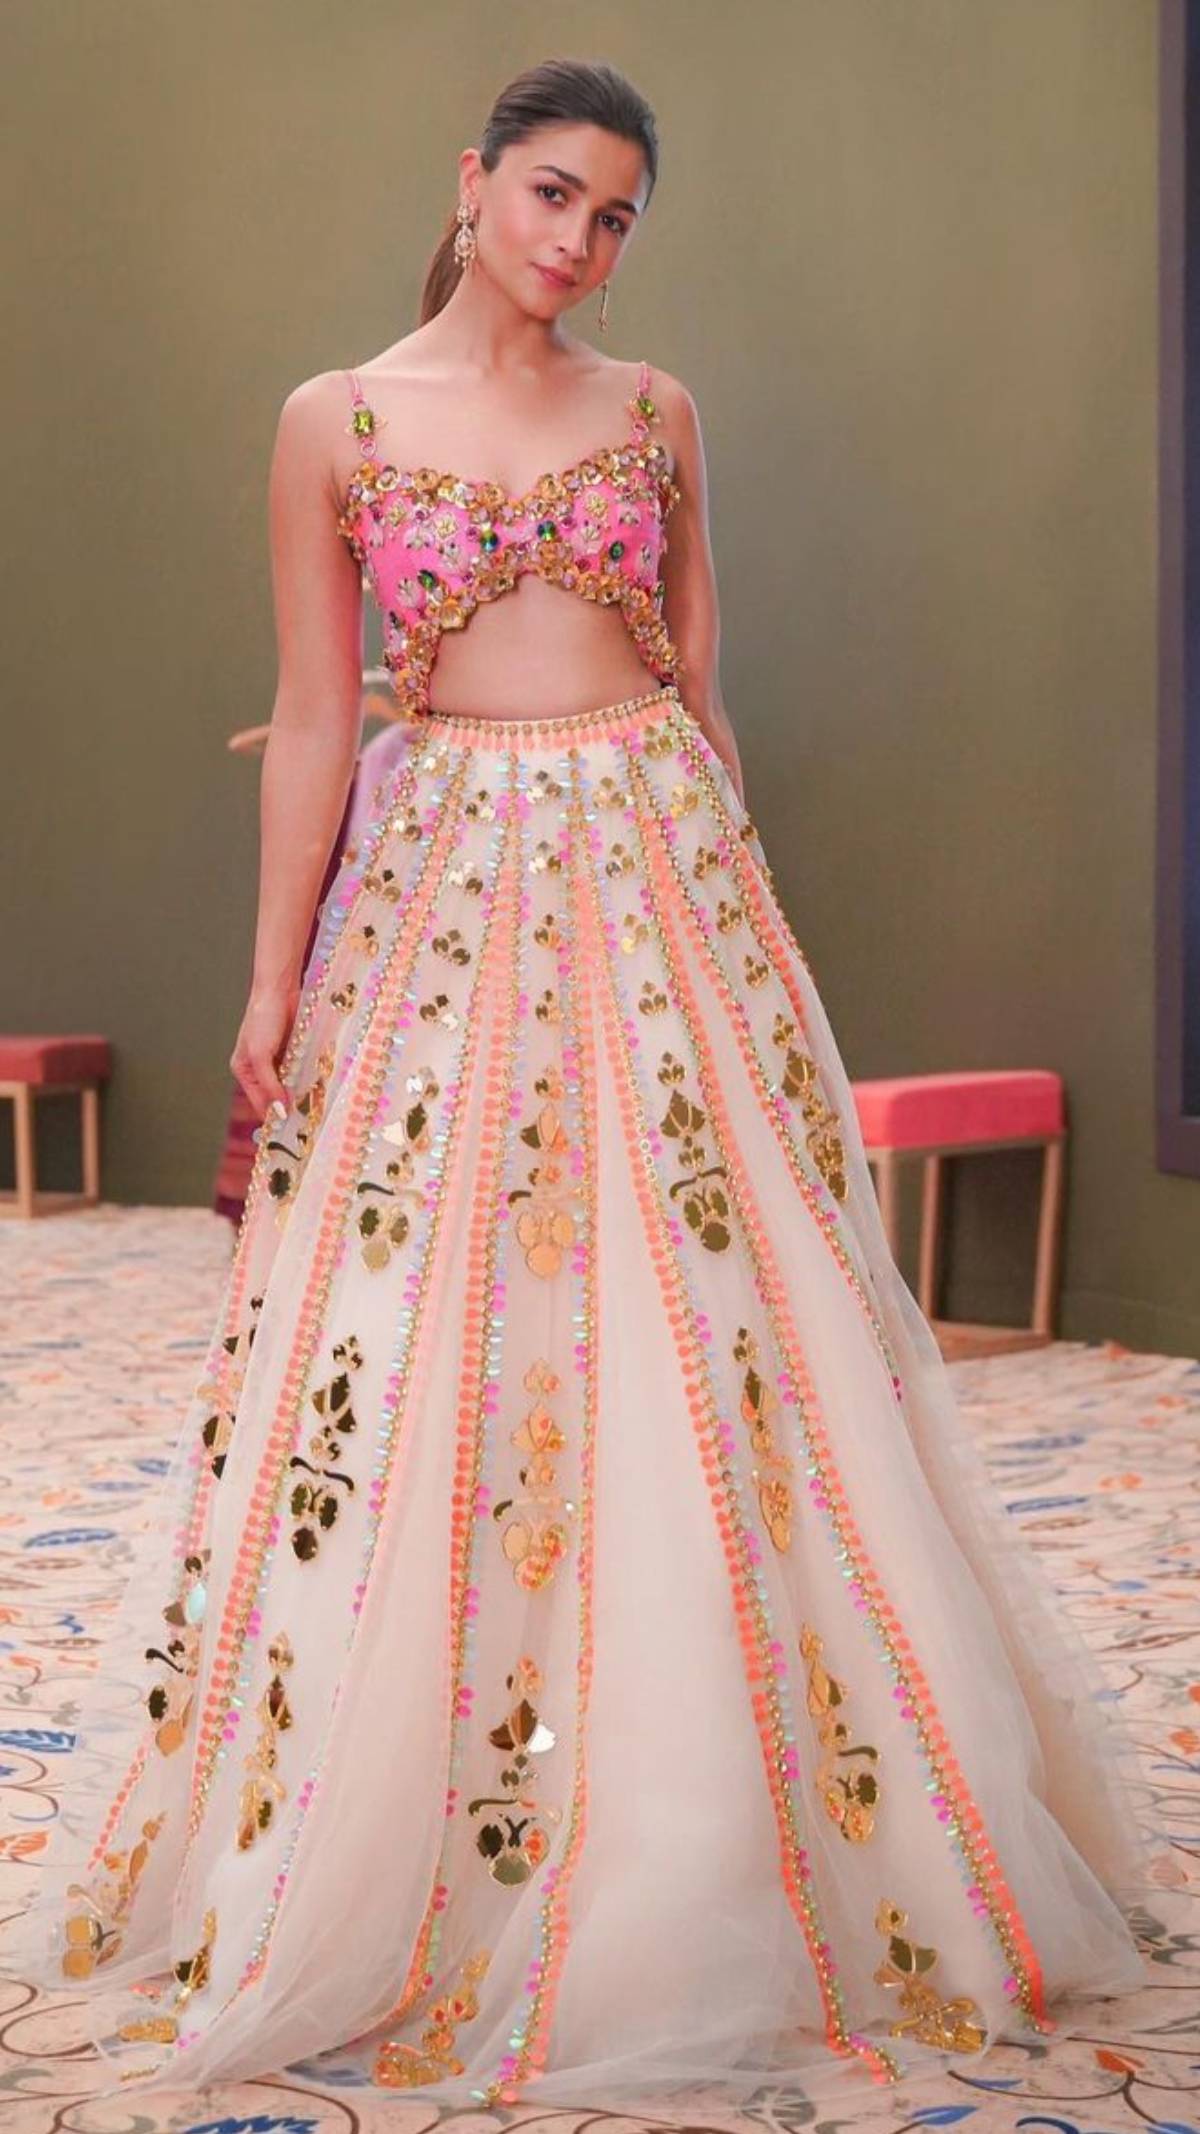 Alia Bhatt gives her twist to a modern princess in a quirky lehenga